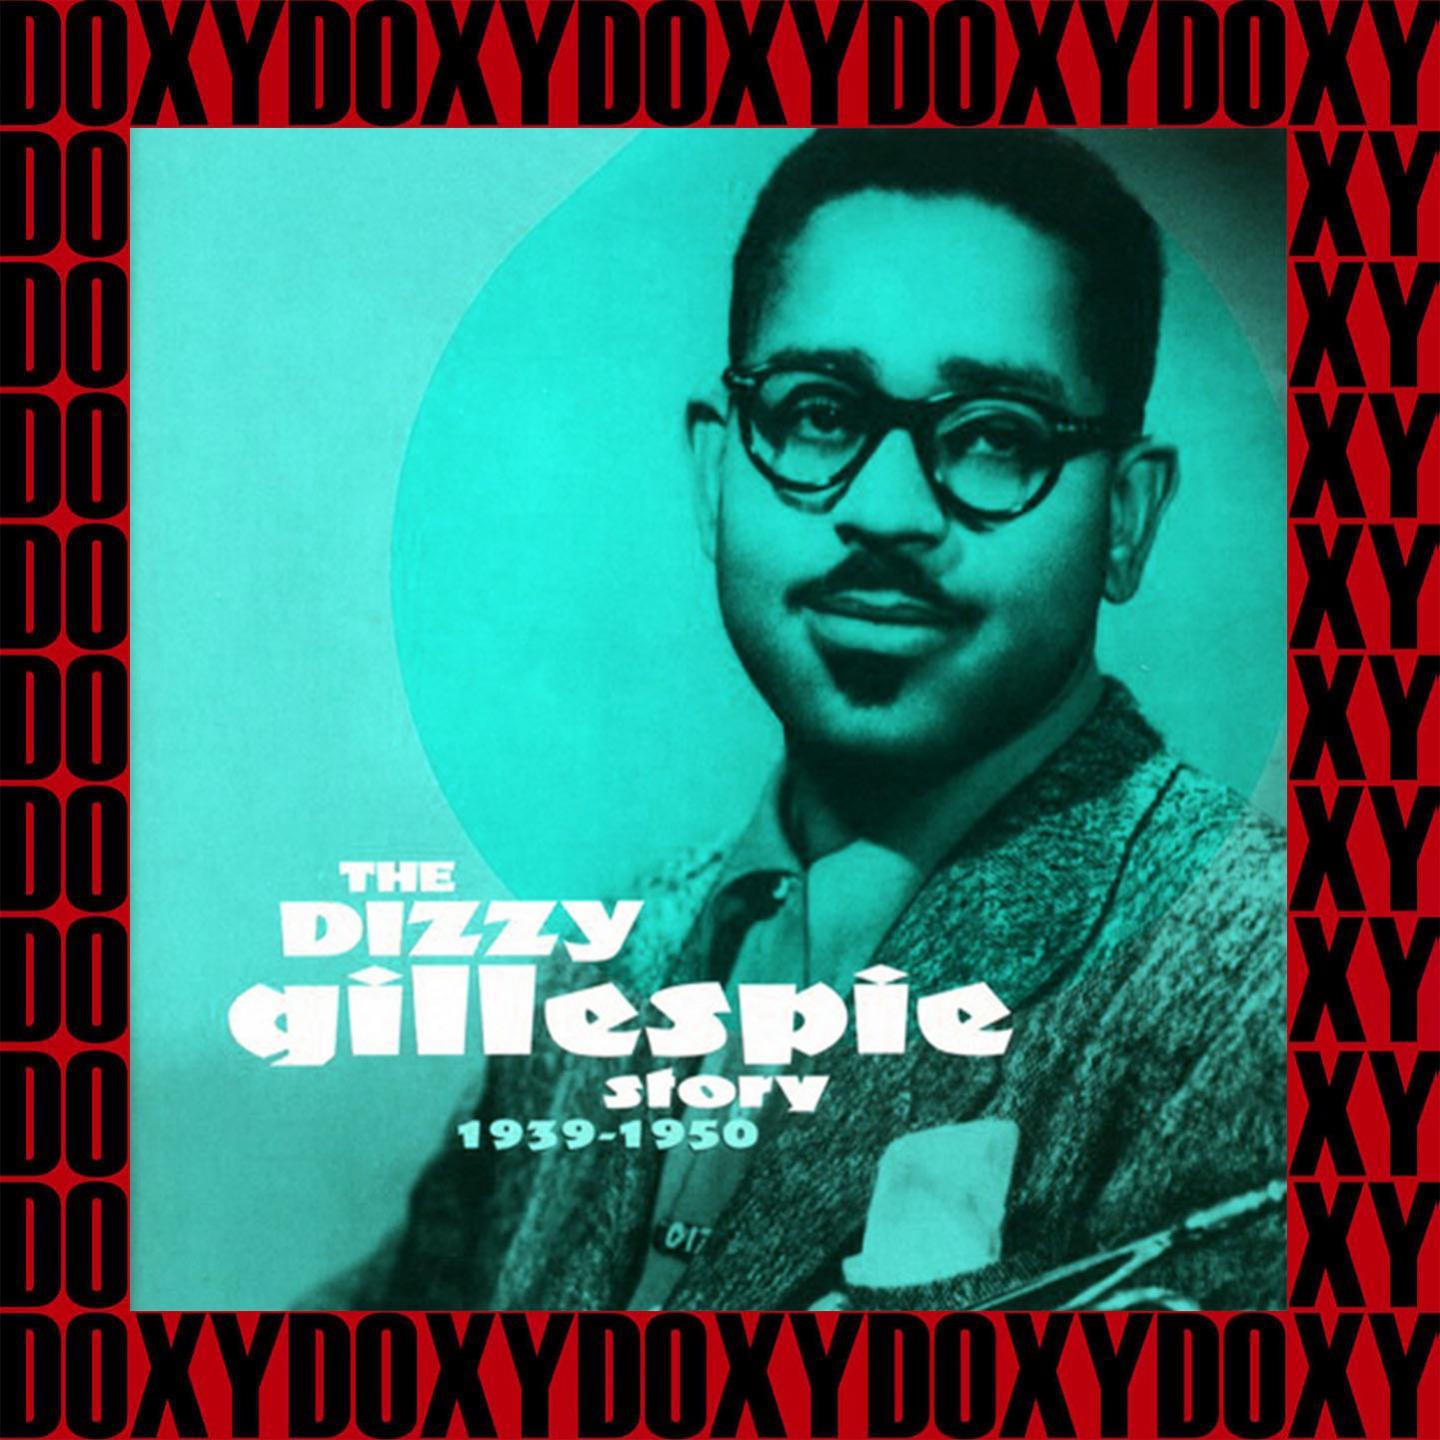 The Dizzy Gillespie Story, 1939-1950 (Remastered Version) (Doxy Collection)